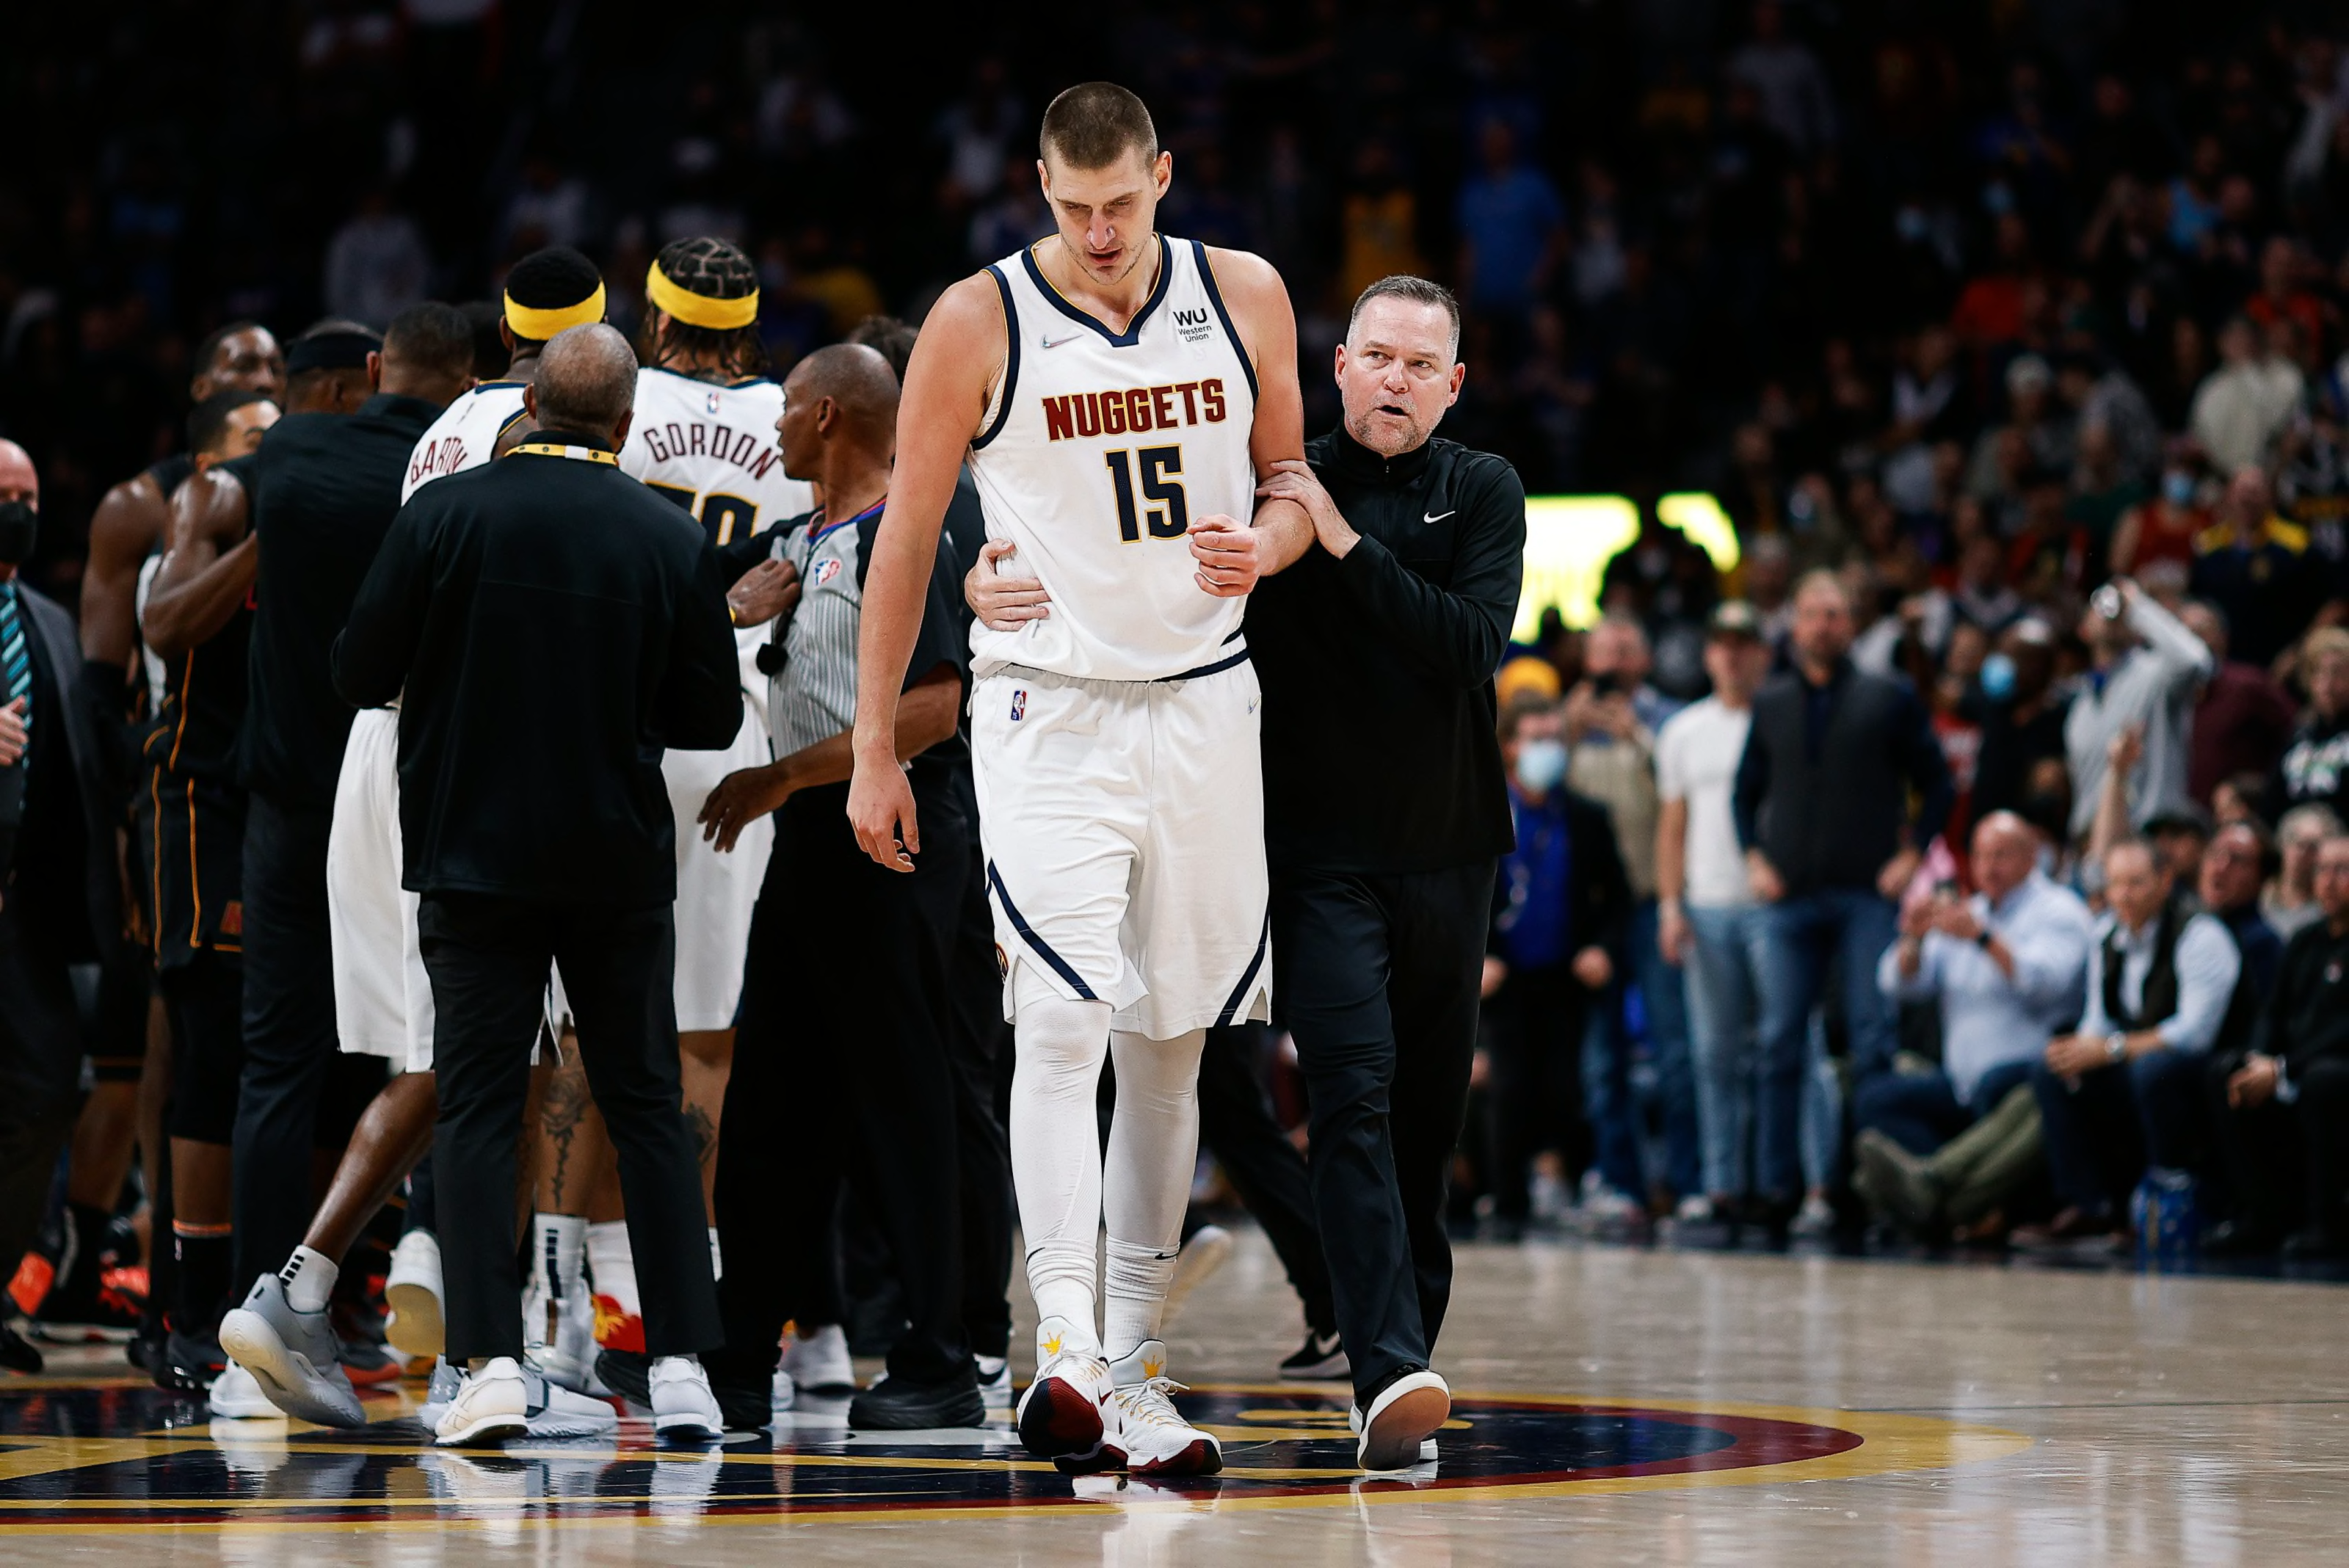 Denver Nuggets head coach Michael Malone pulls center Nikola Jokic (15) away from a scrum in the fourth quarter against the Miami Heat at Ball Arena on 8 Nov. 2021. (Isaiah J. Downing-USA TODAY Sports)